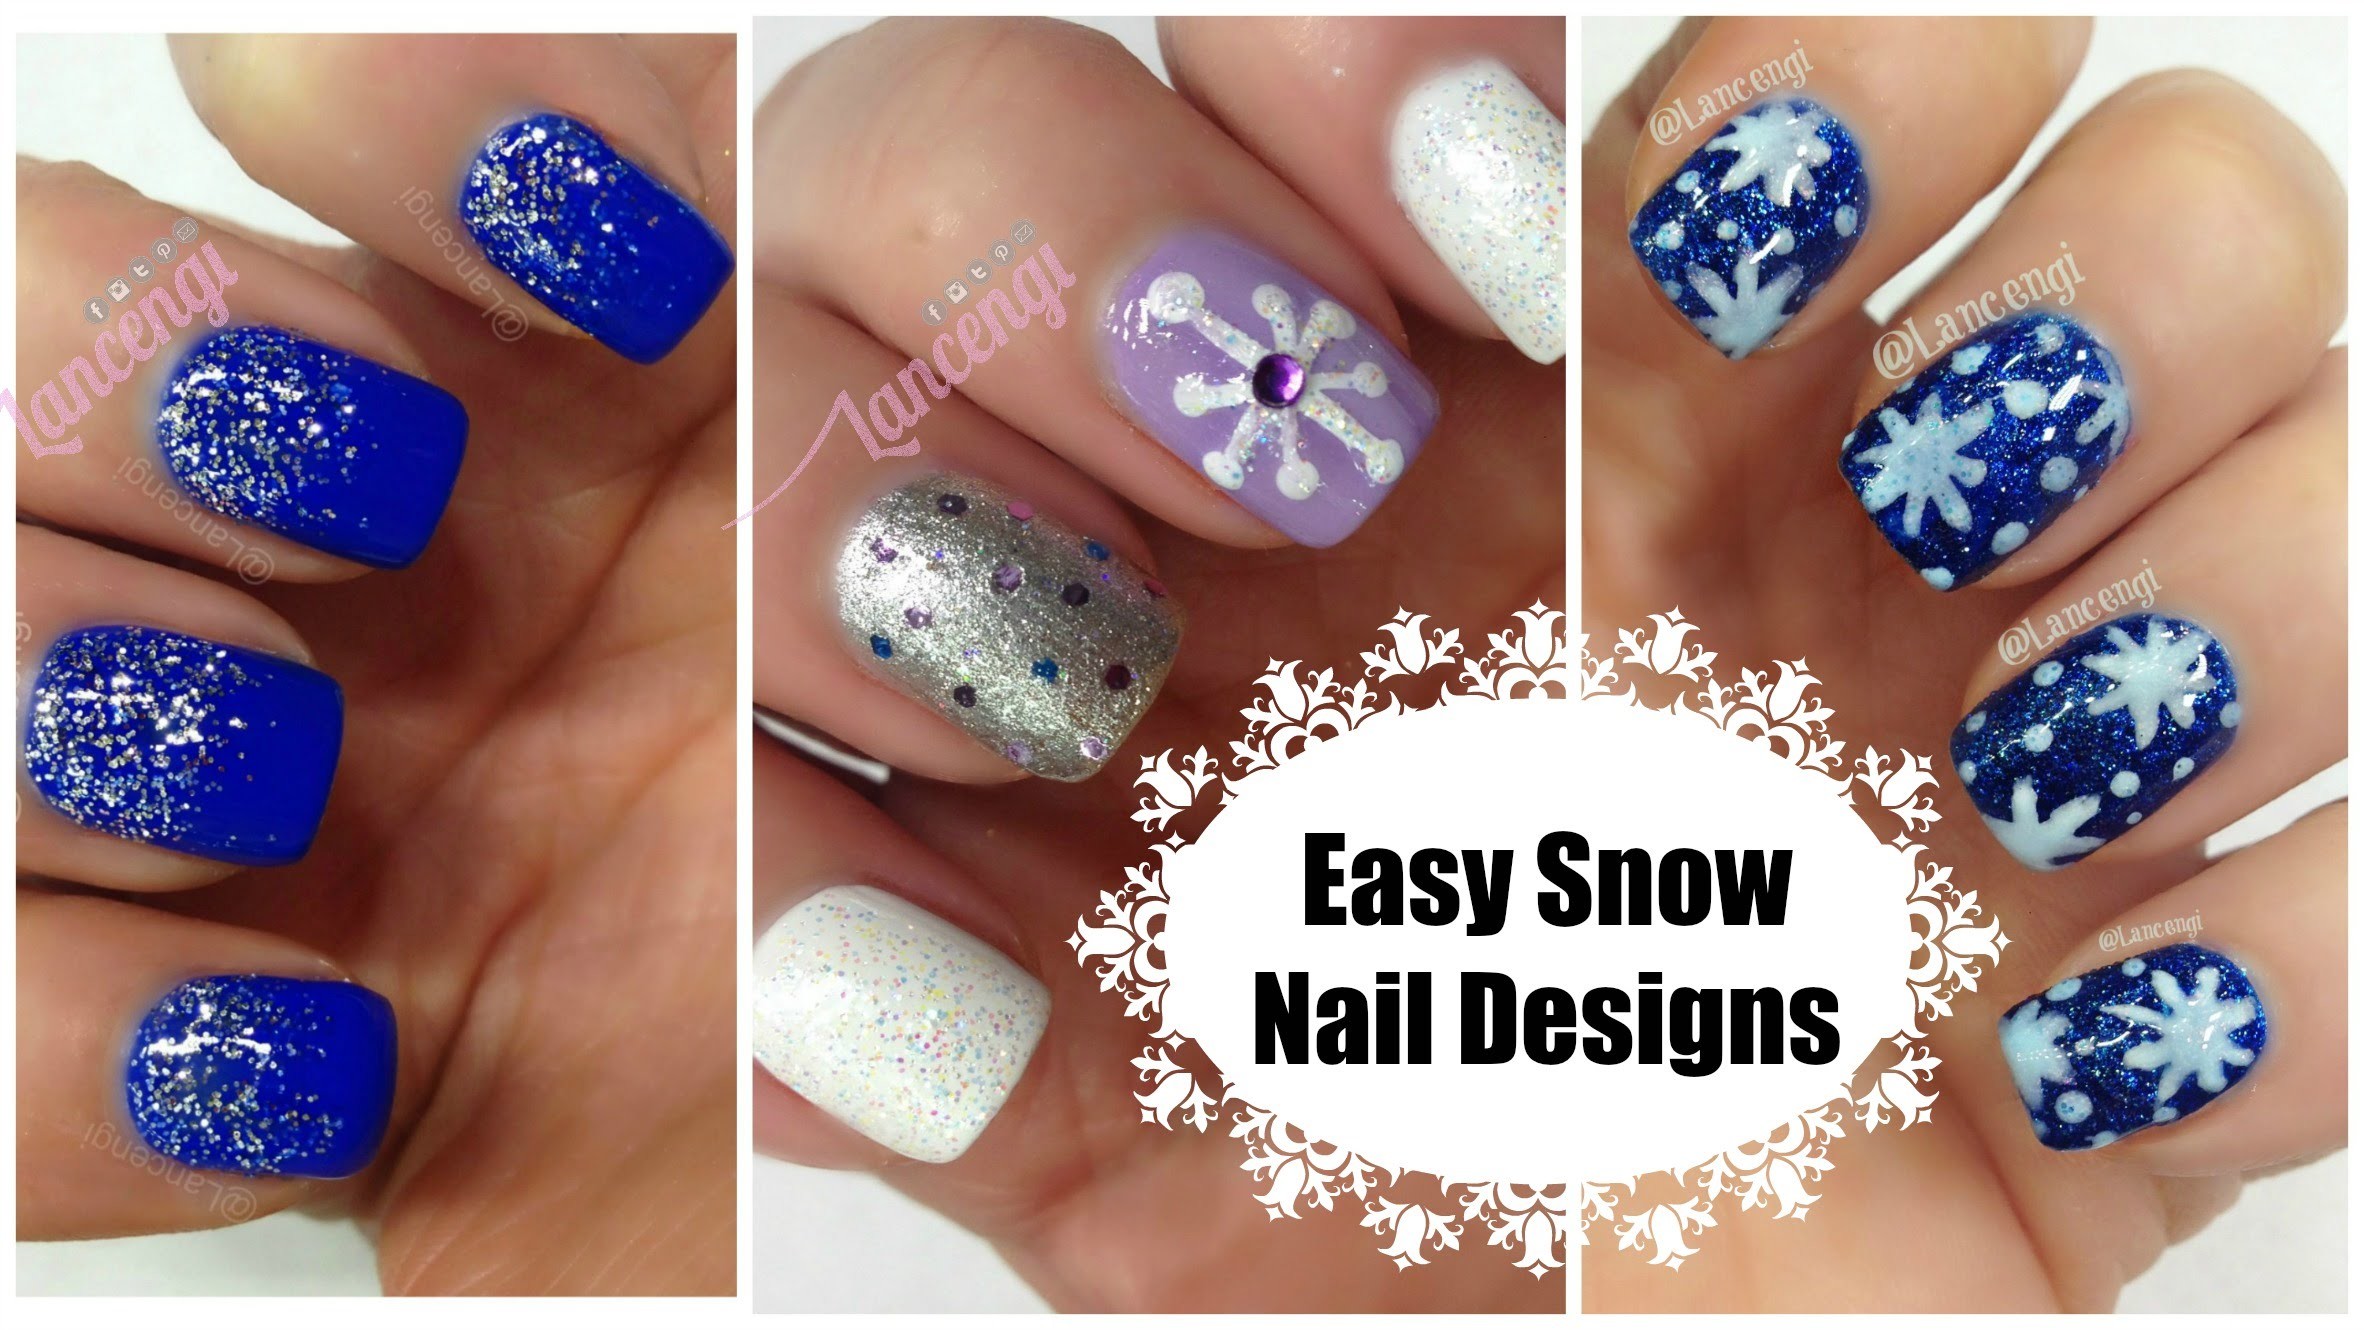 6. 10 Easy Christmas Nail Art Ideas - The Ultimate Guide! - wide 2